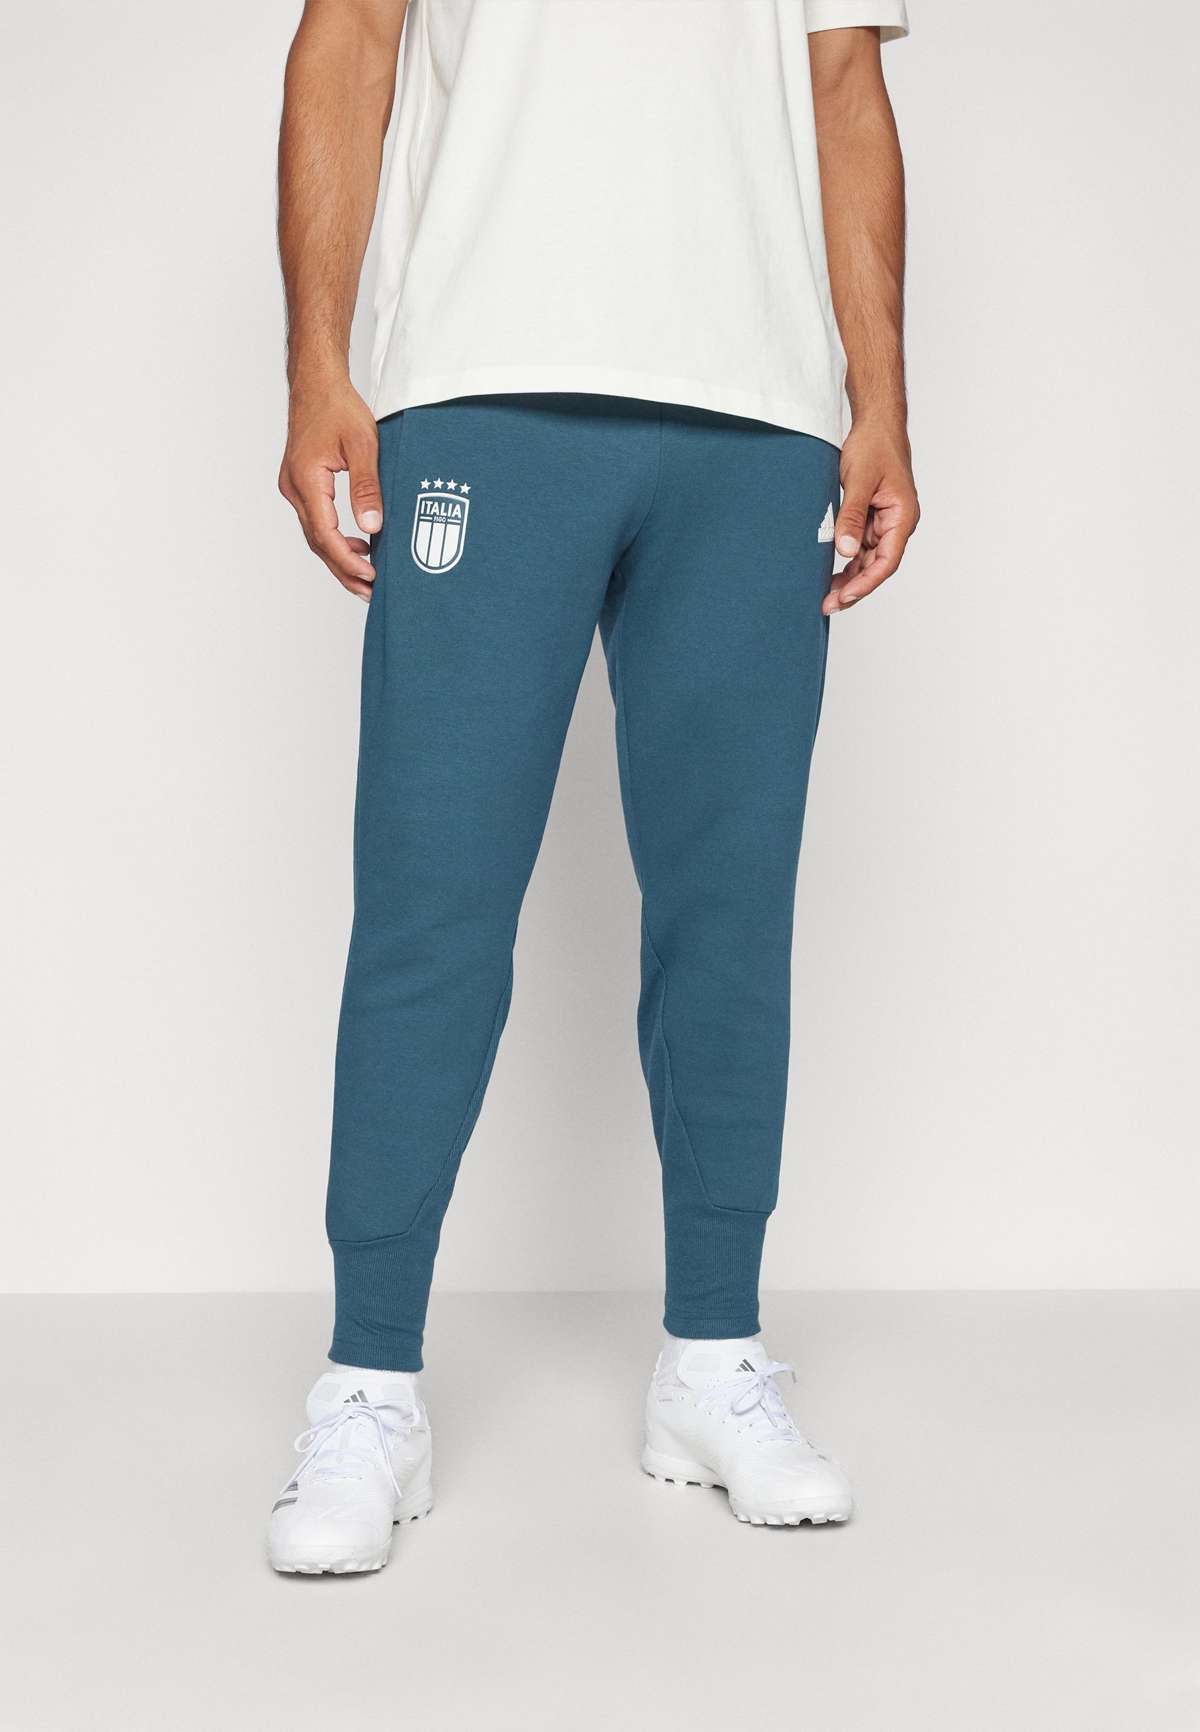 ITALY TRAVEL PANT - Nationalmannschaft ITALY TRAVEL PANT